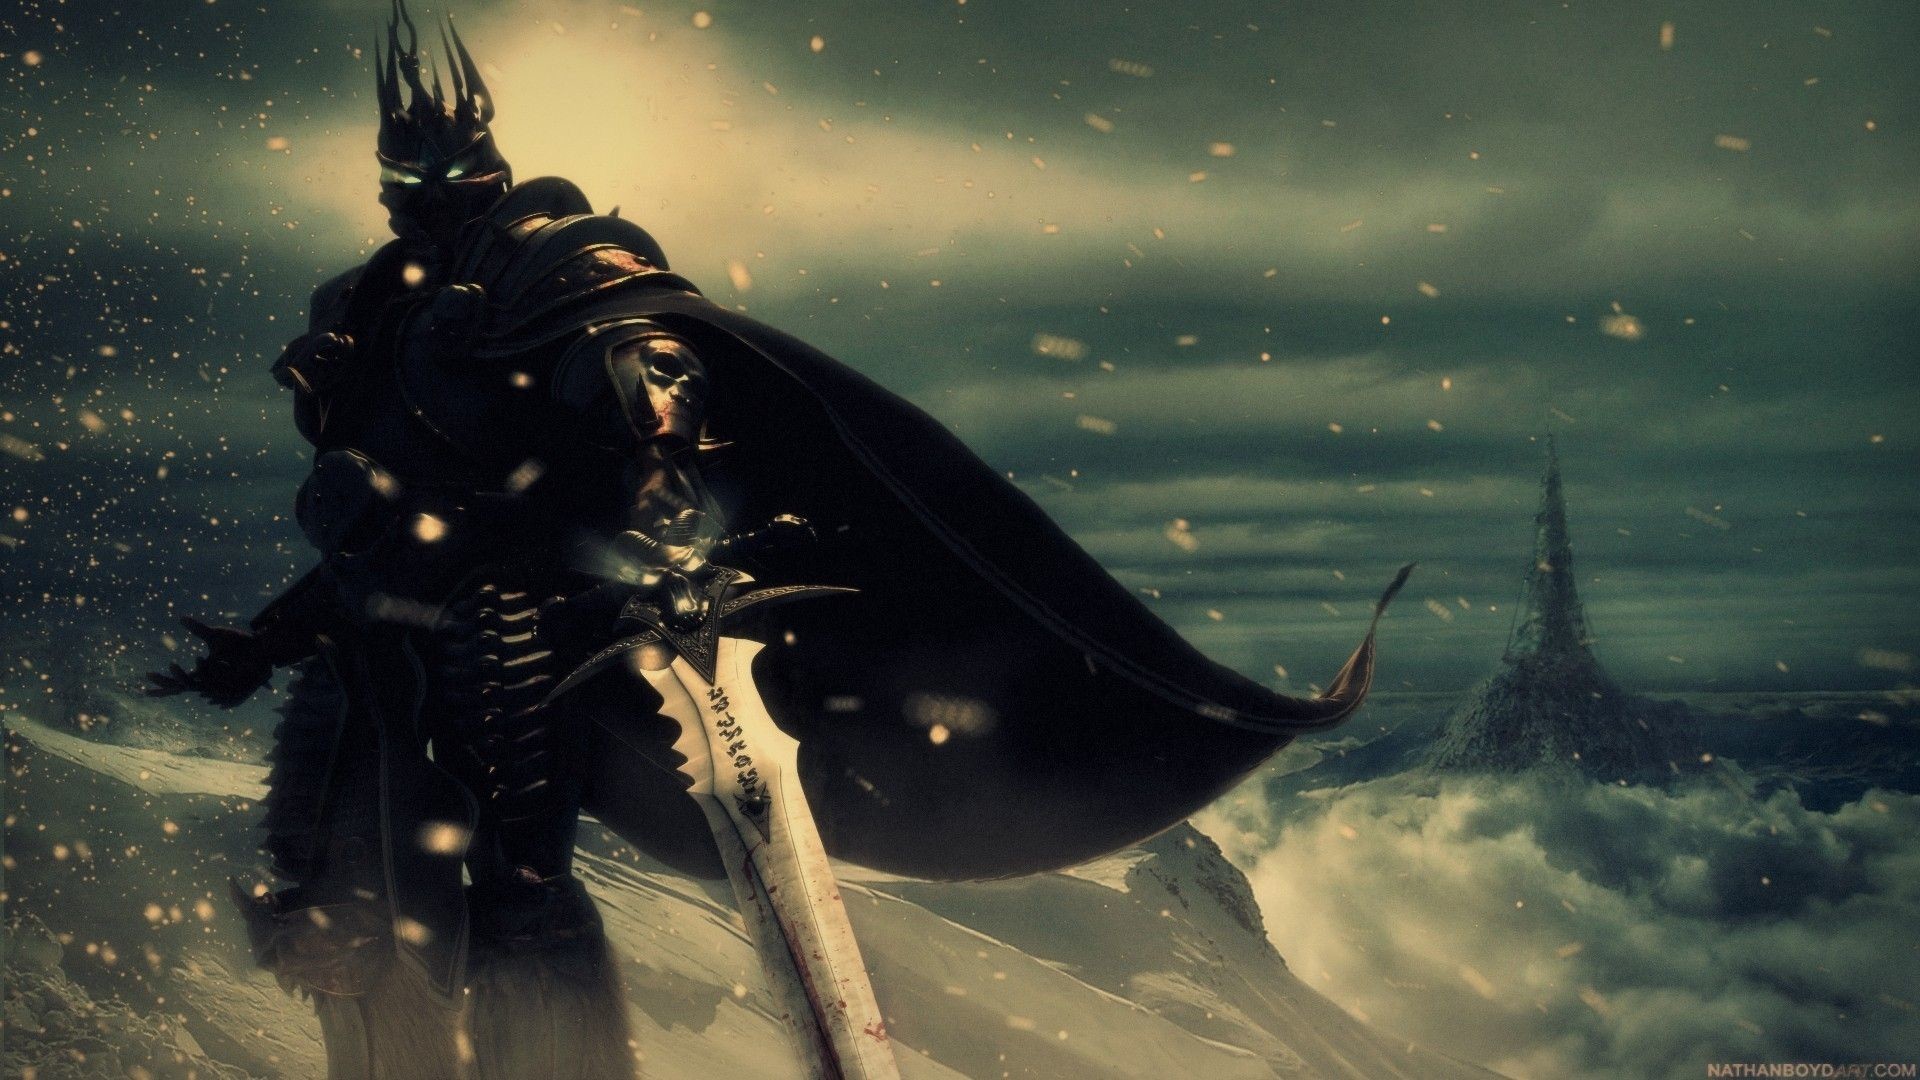 1920x1080 World Of Warcraft Wrath Of The Lich King wallpaper 212302